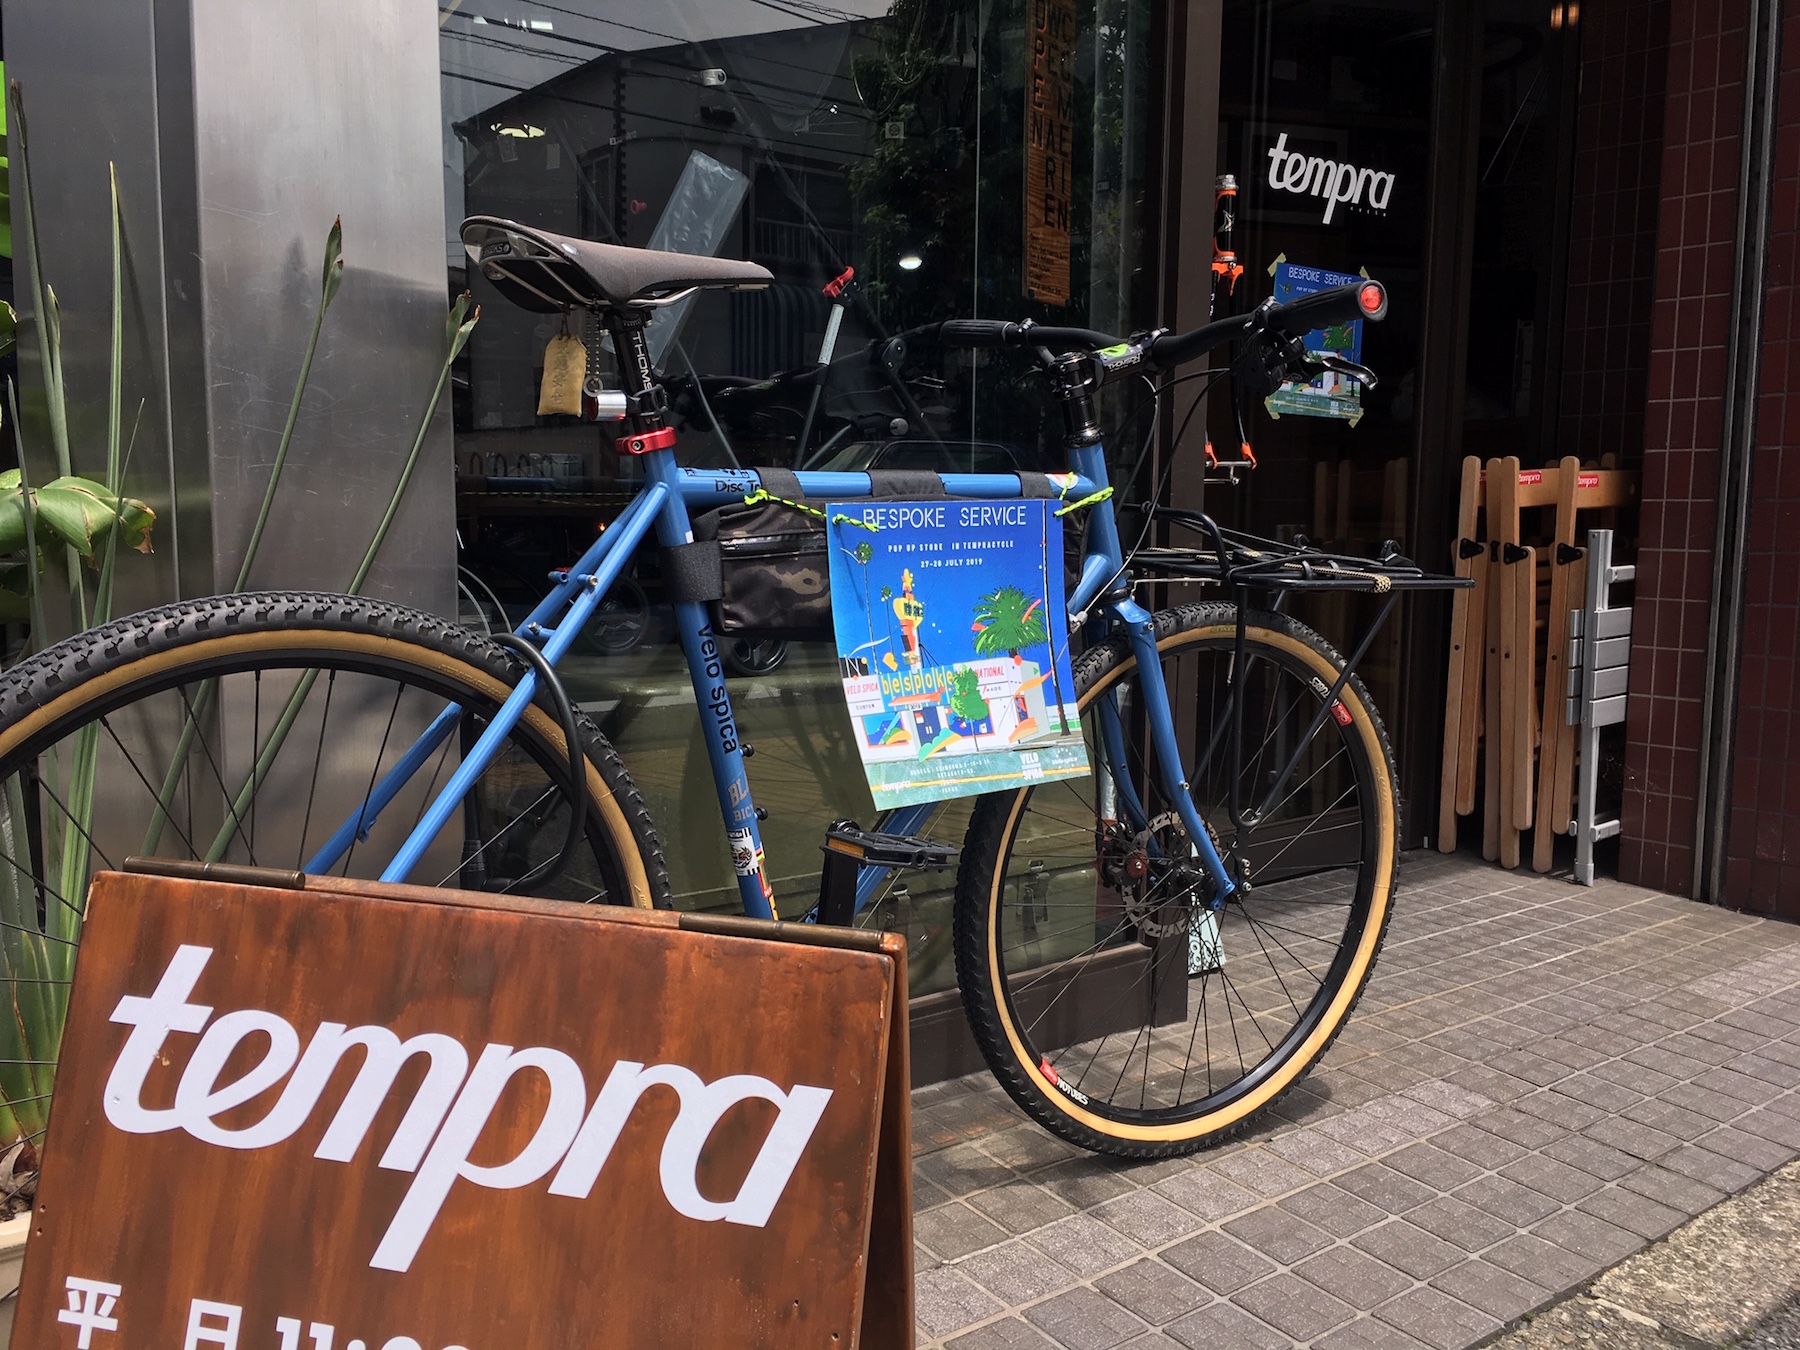 POP UP STORE "BESPOKE SERVICE" in tempra cycle 